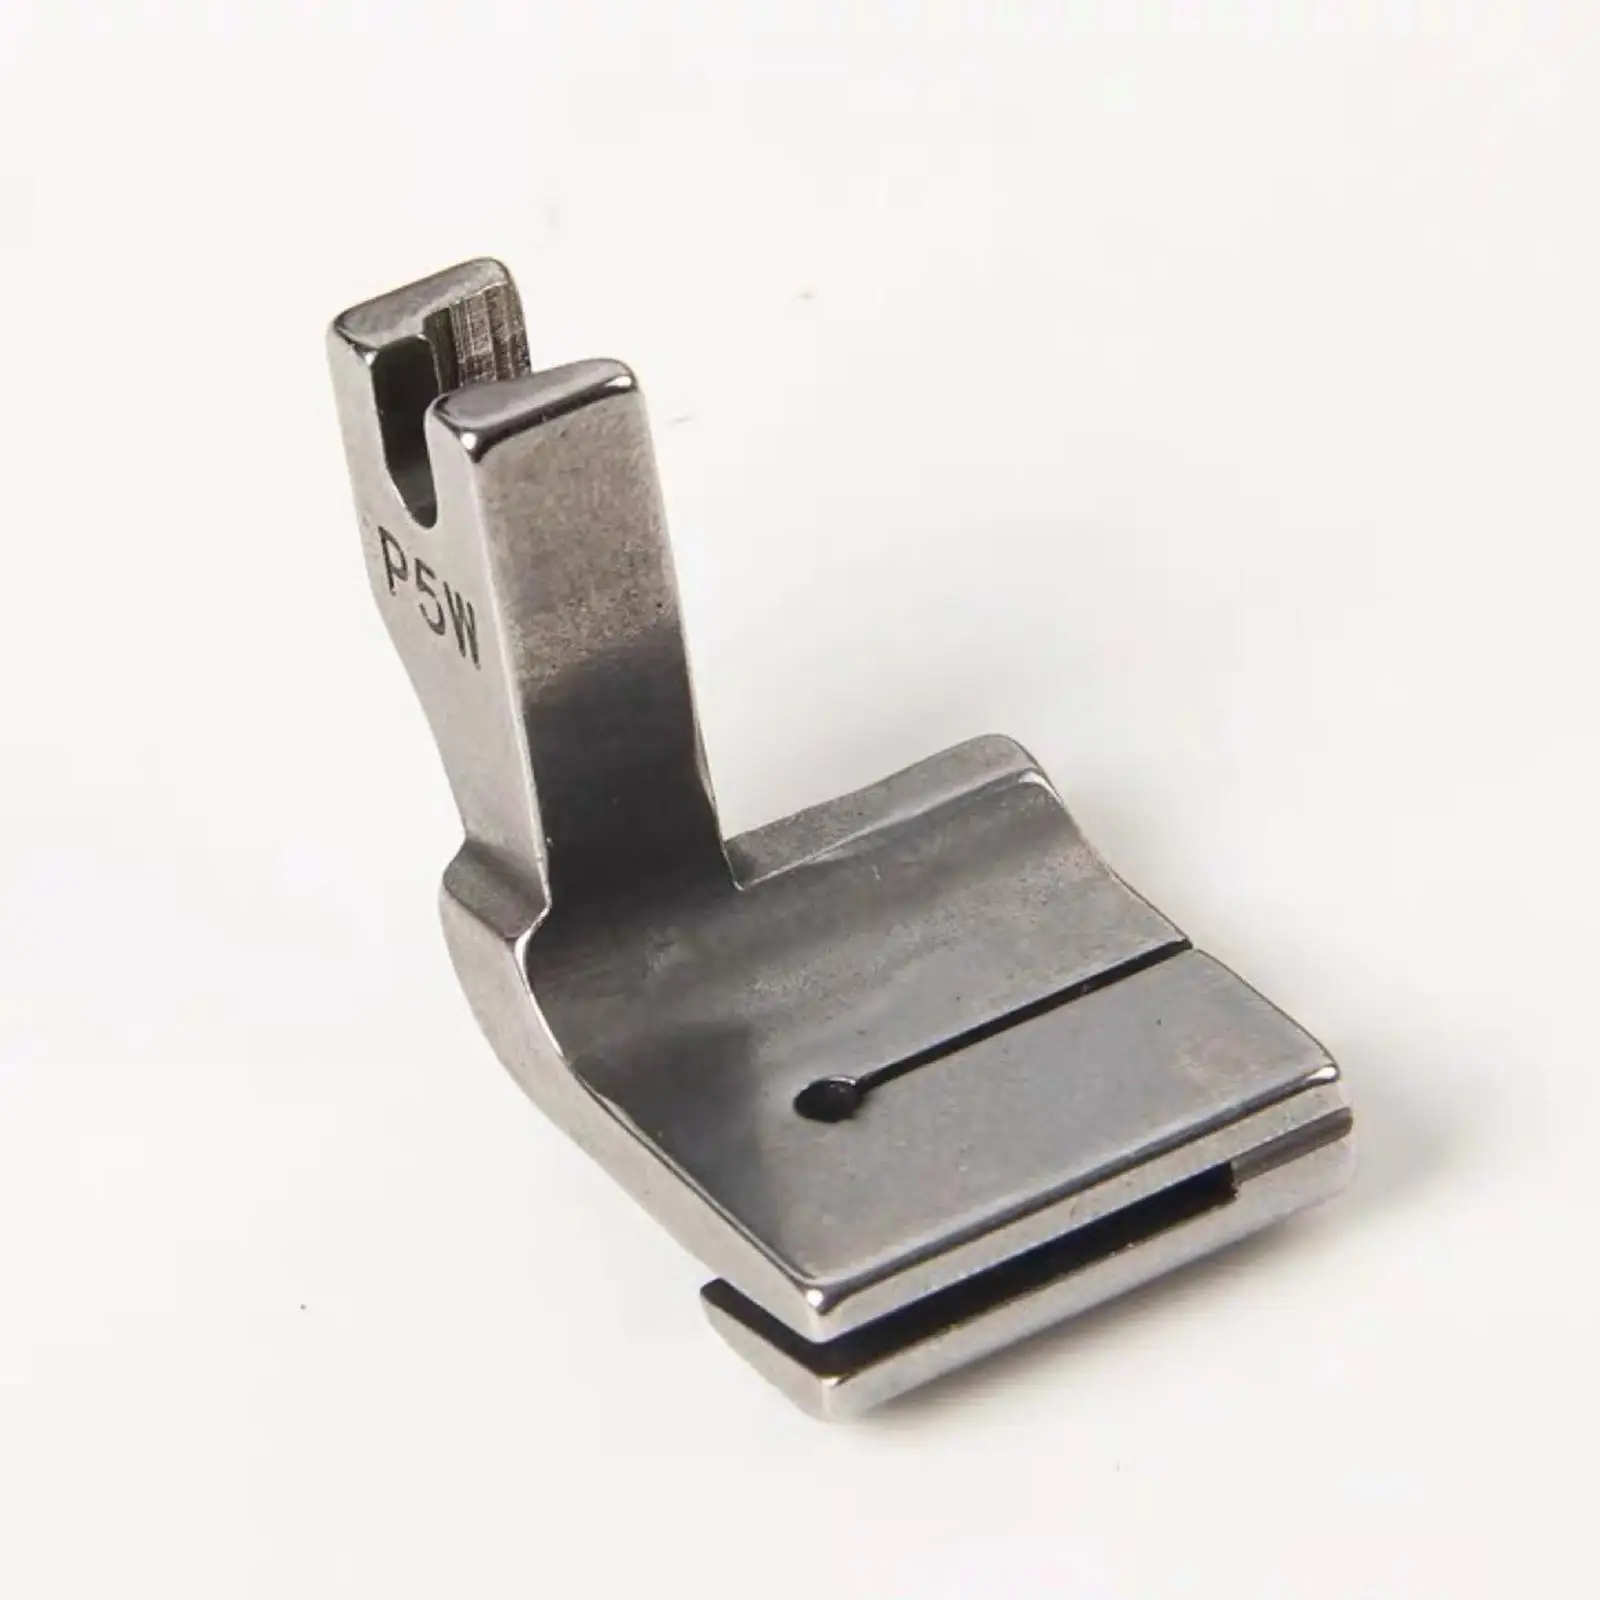 Wrinkled Pleated Presser Foot Replaces Cutting Dies Sewing Machine Parts P5W Presser Foot for Lockstitch Sewing Machine Accs